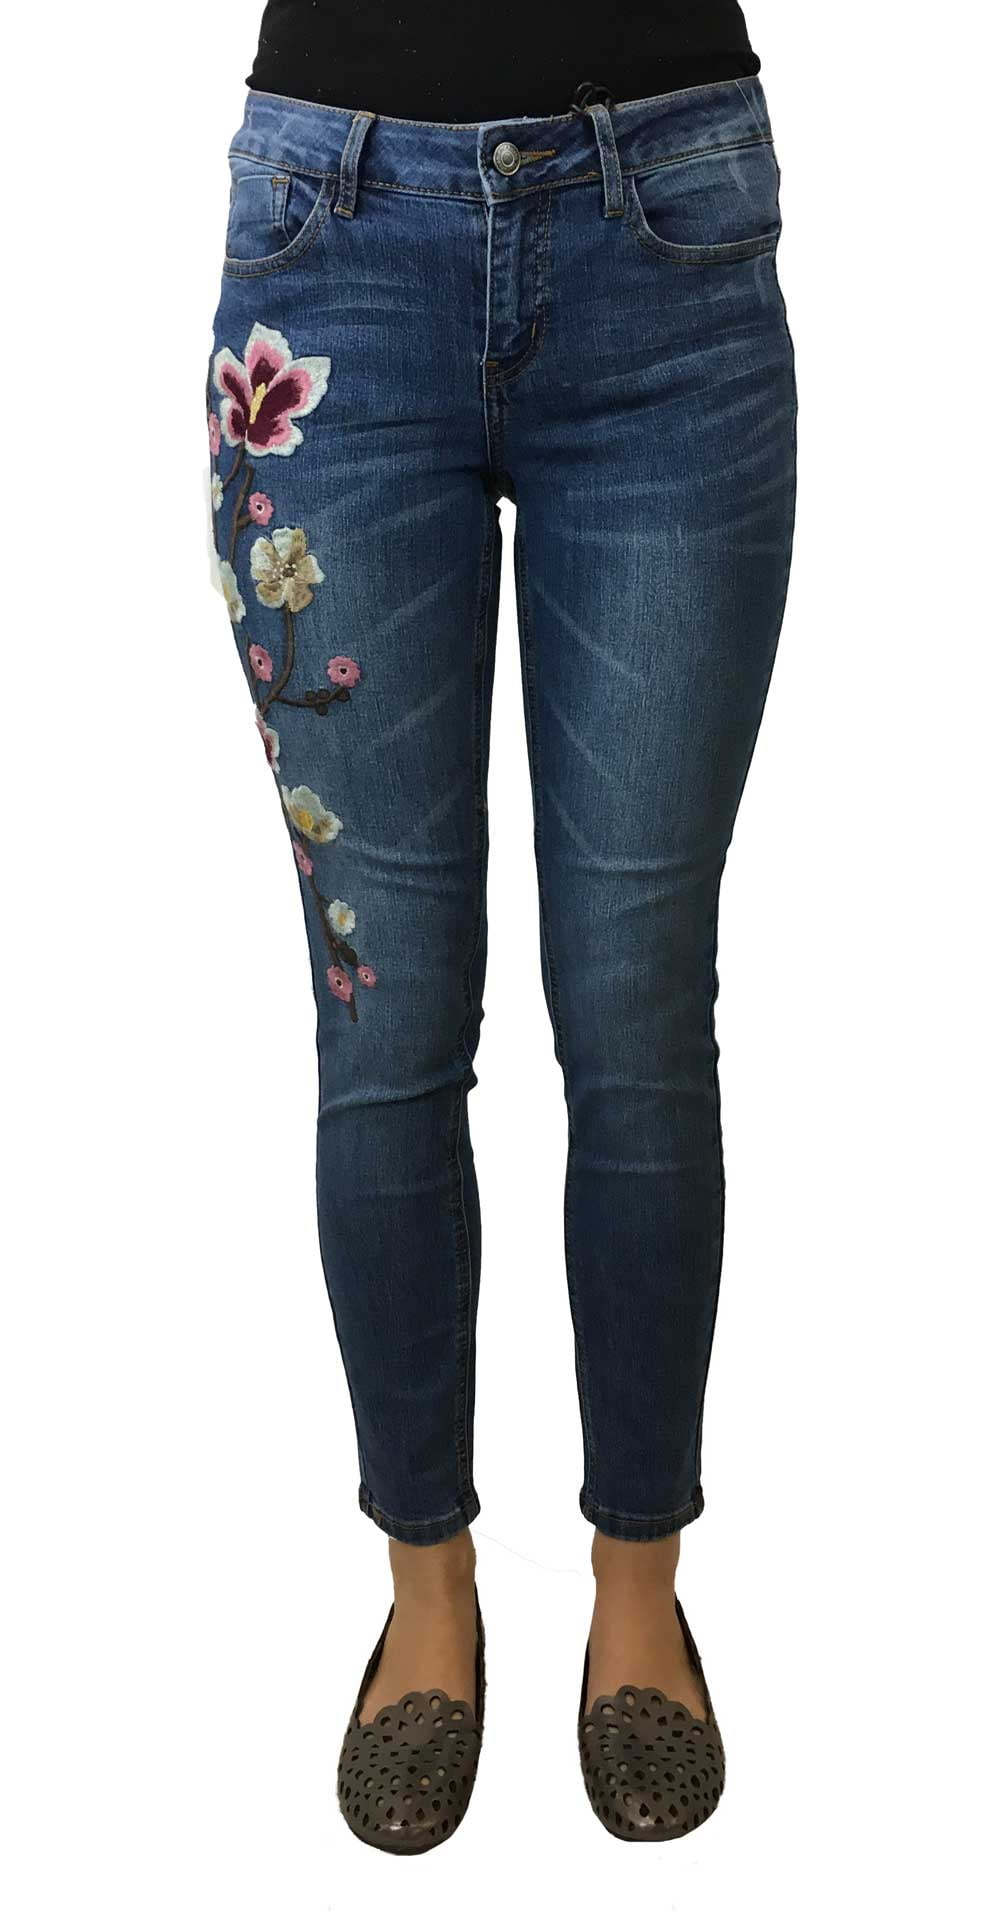 women's floral embroidered jeans